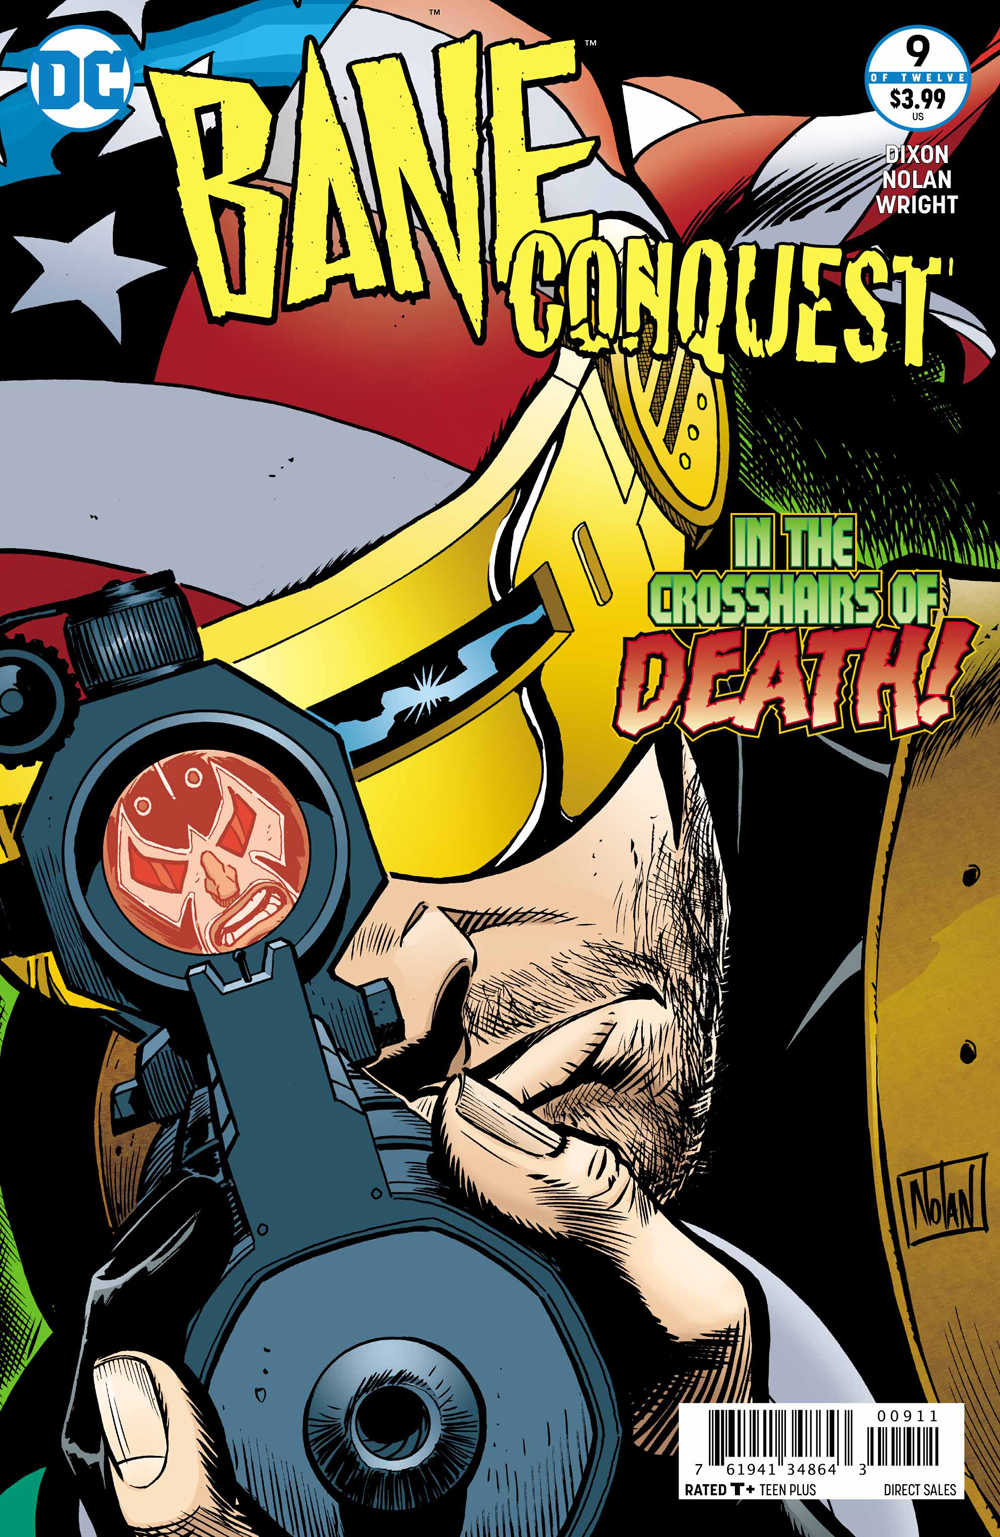 BANE CONQUEST #9 (OF 12)